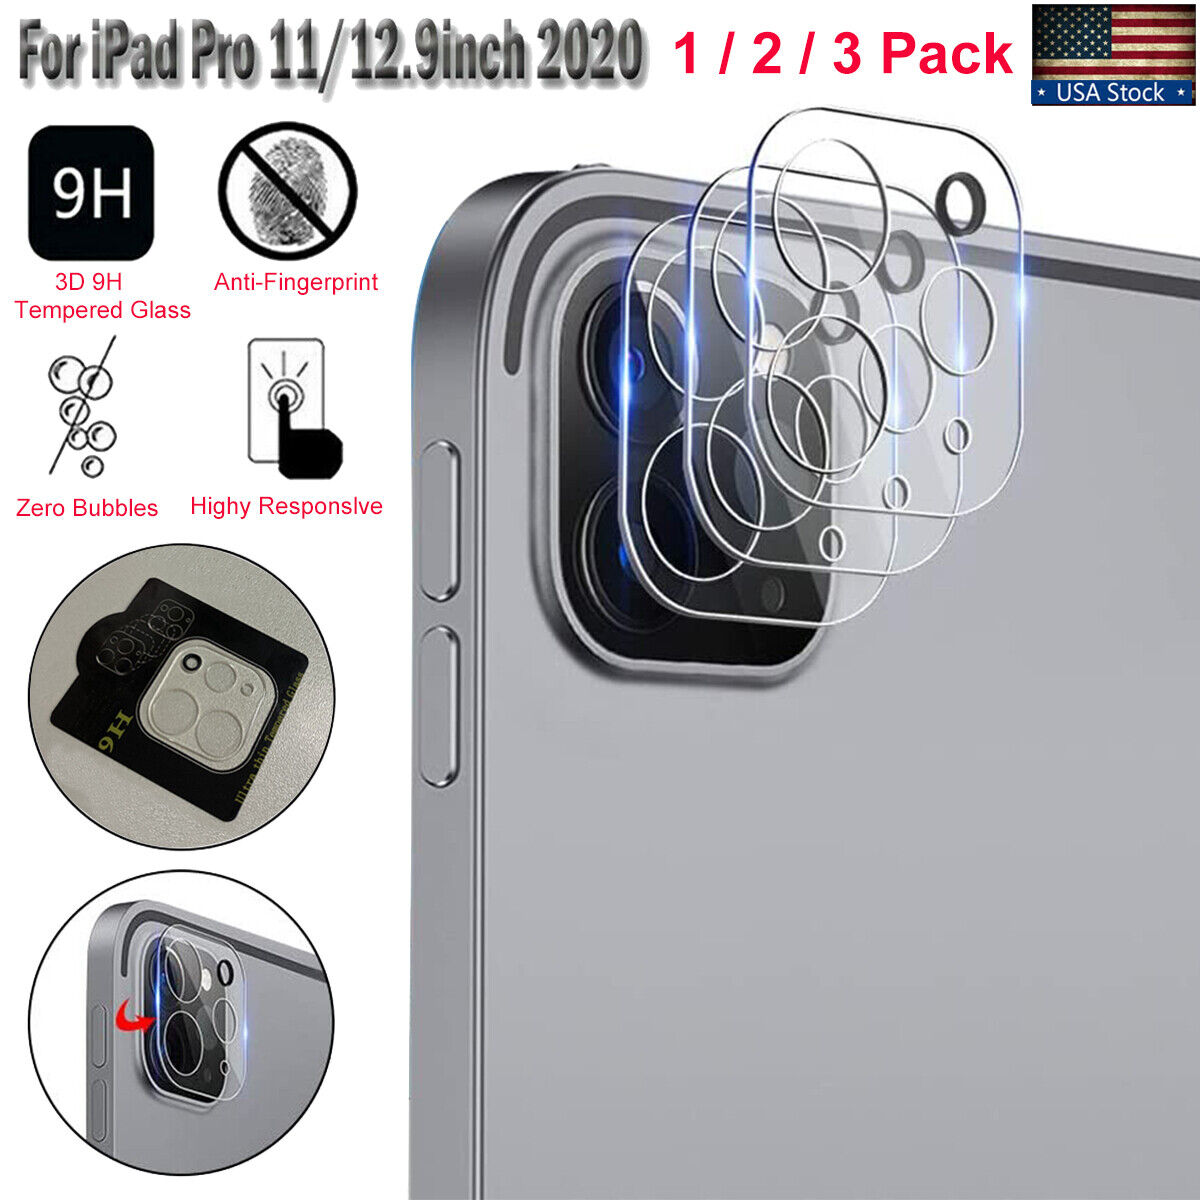 3D Full Tempered Glass Camera Lens Screen Protector for iPad Pro